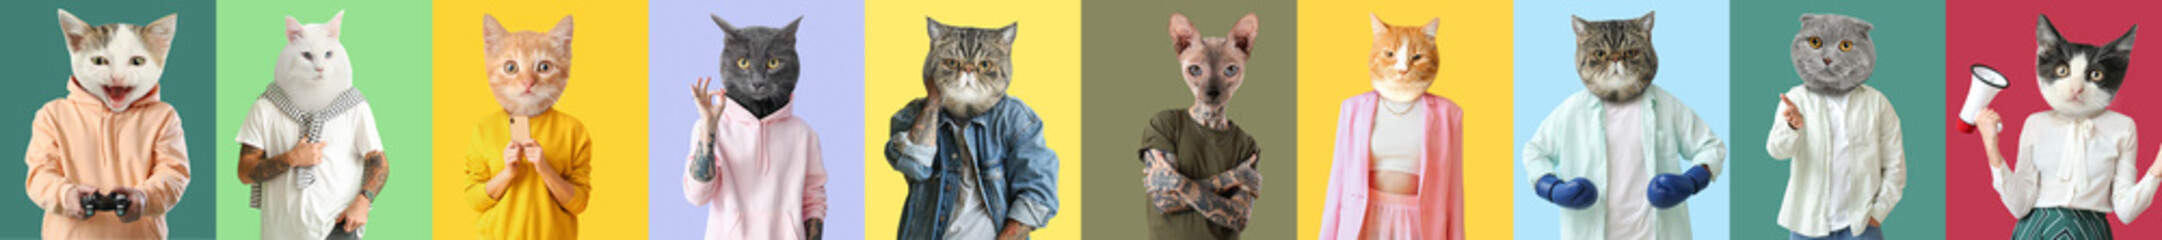 Set of cute cats with human bodies on colorful background